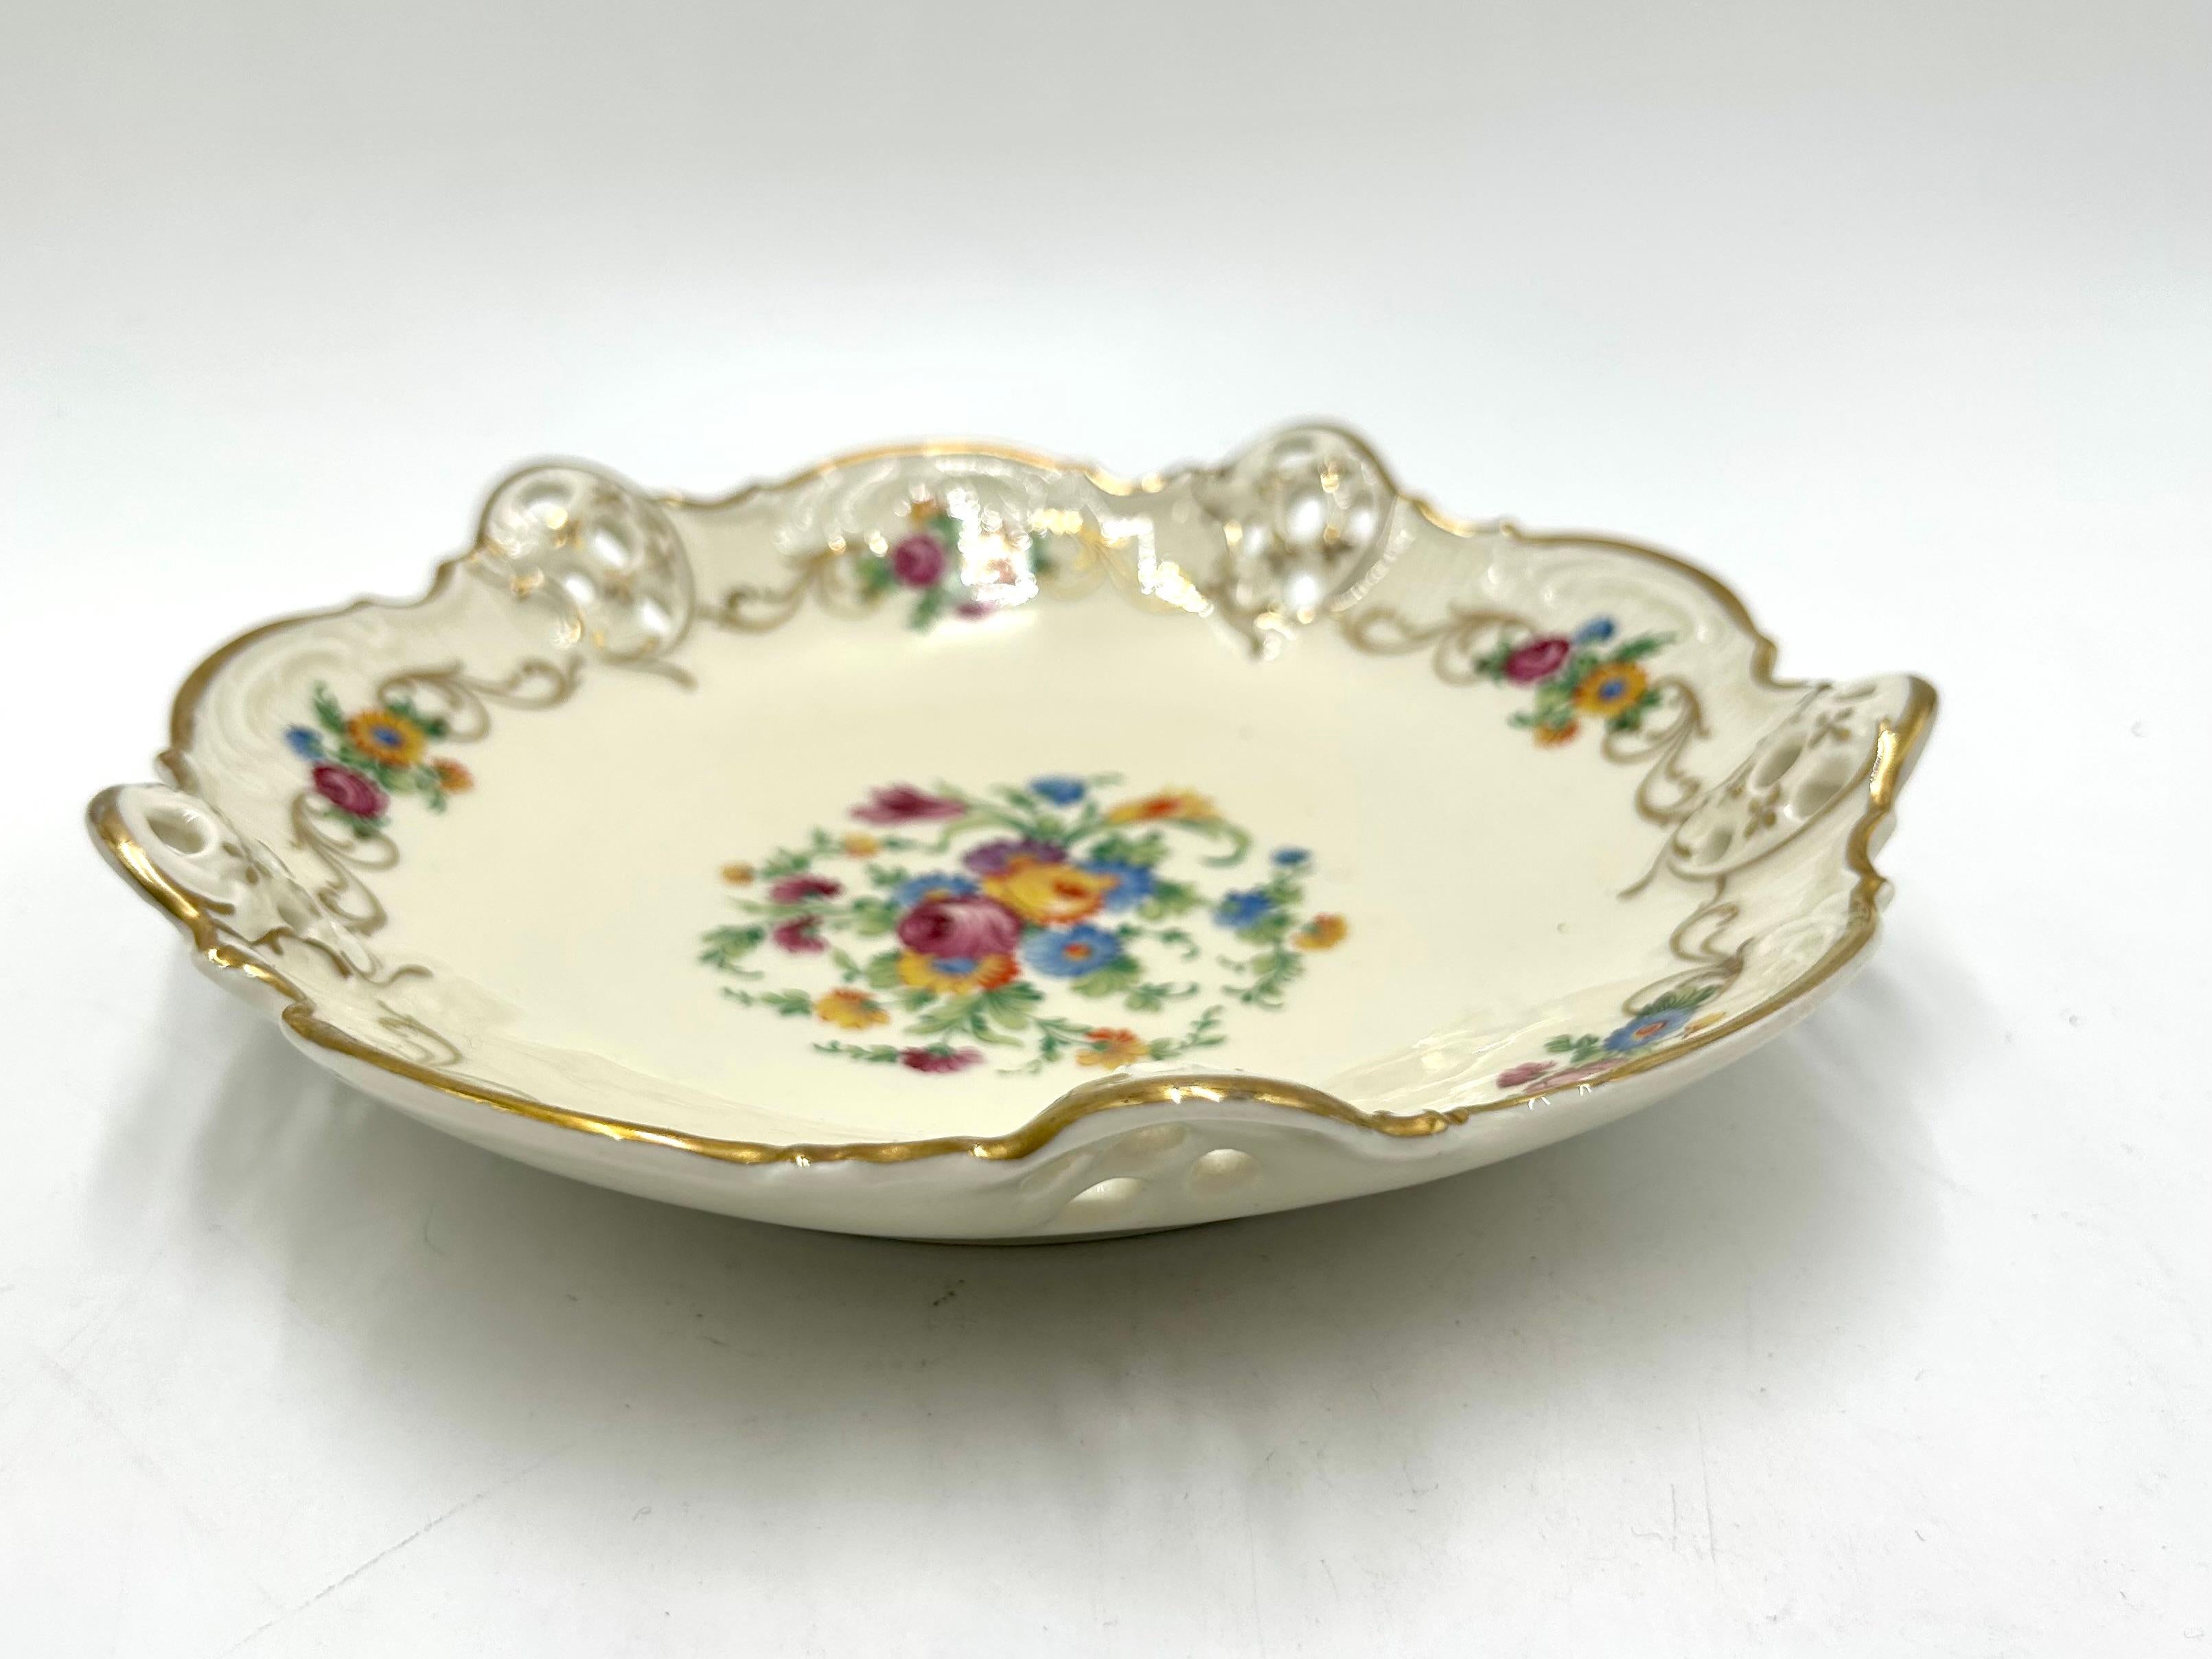 A plate with openwork sides from the Moliere series by the renowned German Rosenthal porcelain factory.

Ecru porcelain decorated with gilding on the edges and a floral bouquet motif.

Signed with the mark of the manufacturer from the years